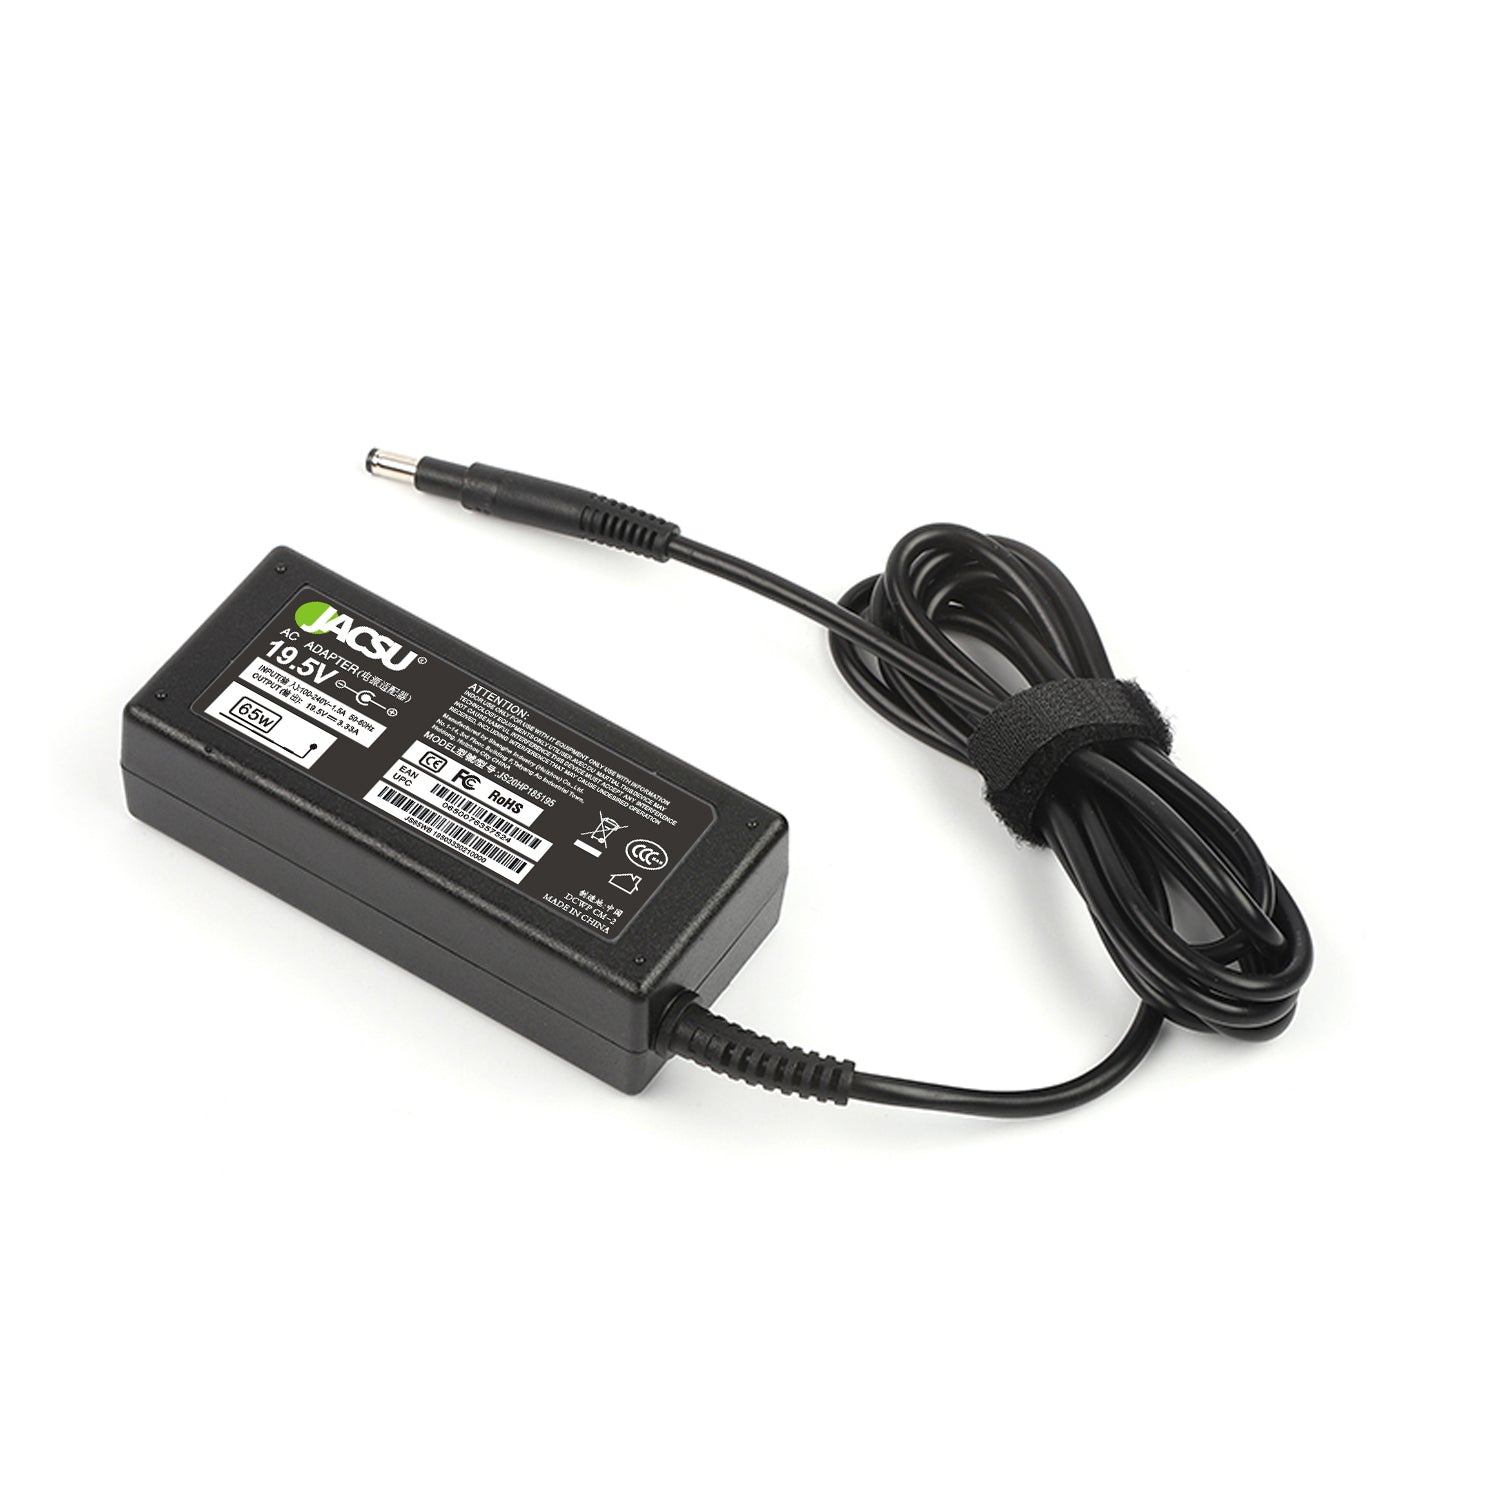 Jacsu 65W 19.5V 3.33A Pin 4.8 X 1.7mm AC Laptop Adapter/Charger for HP compaq 15-A000, Envy 13-1000